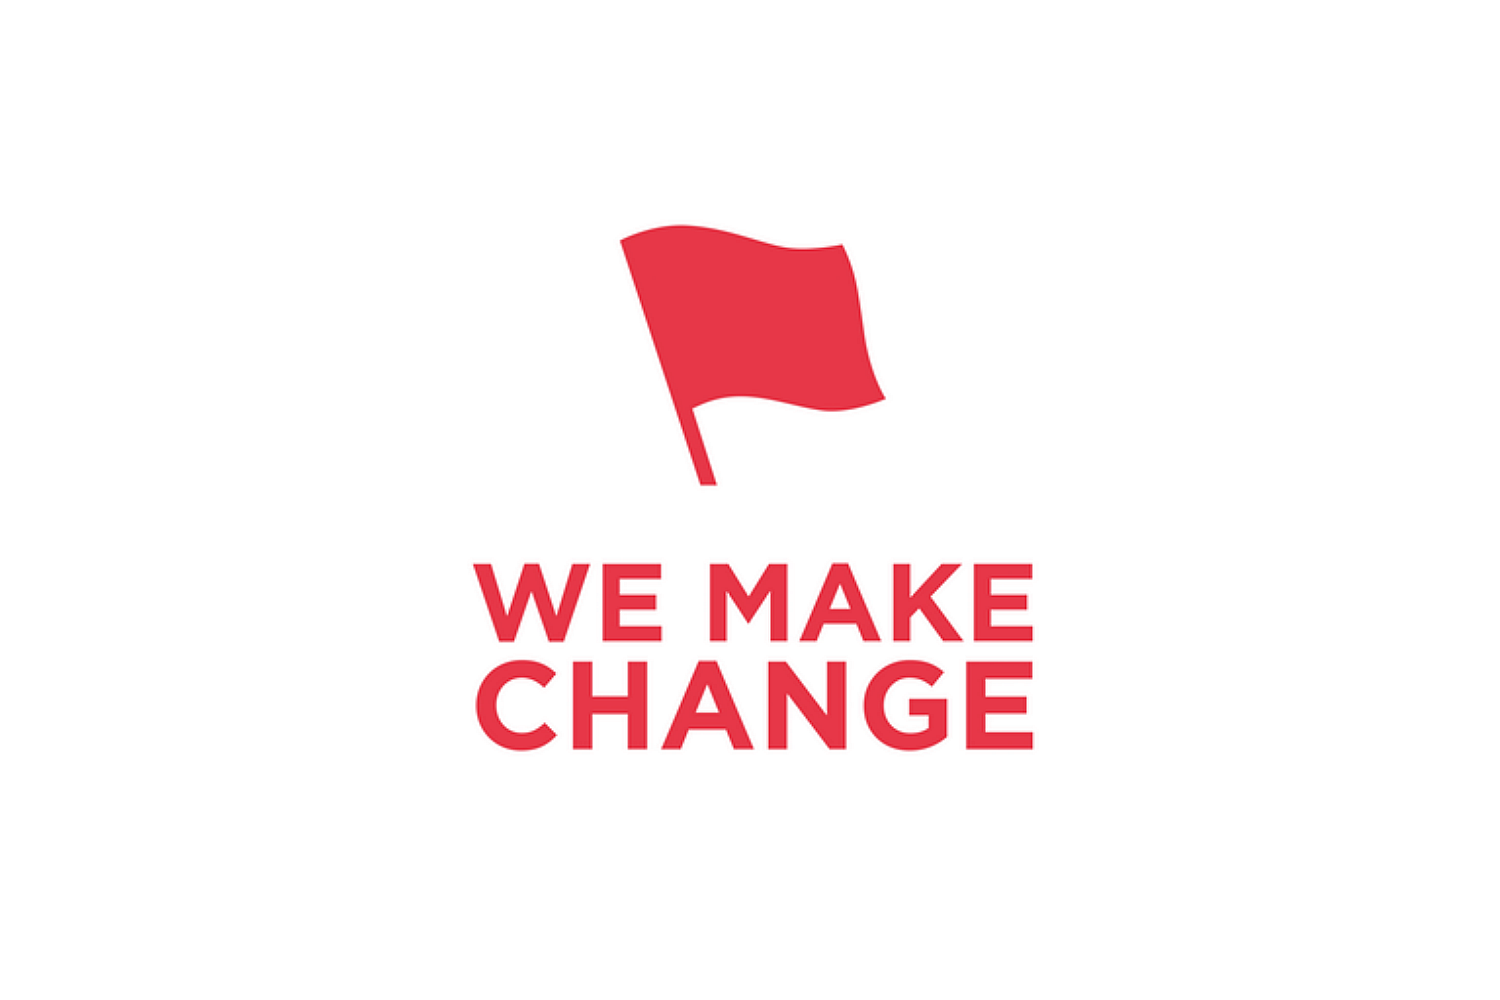 We Make Change – Launch of a Campaign to Change the World